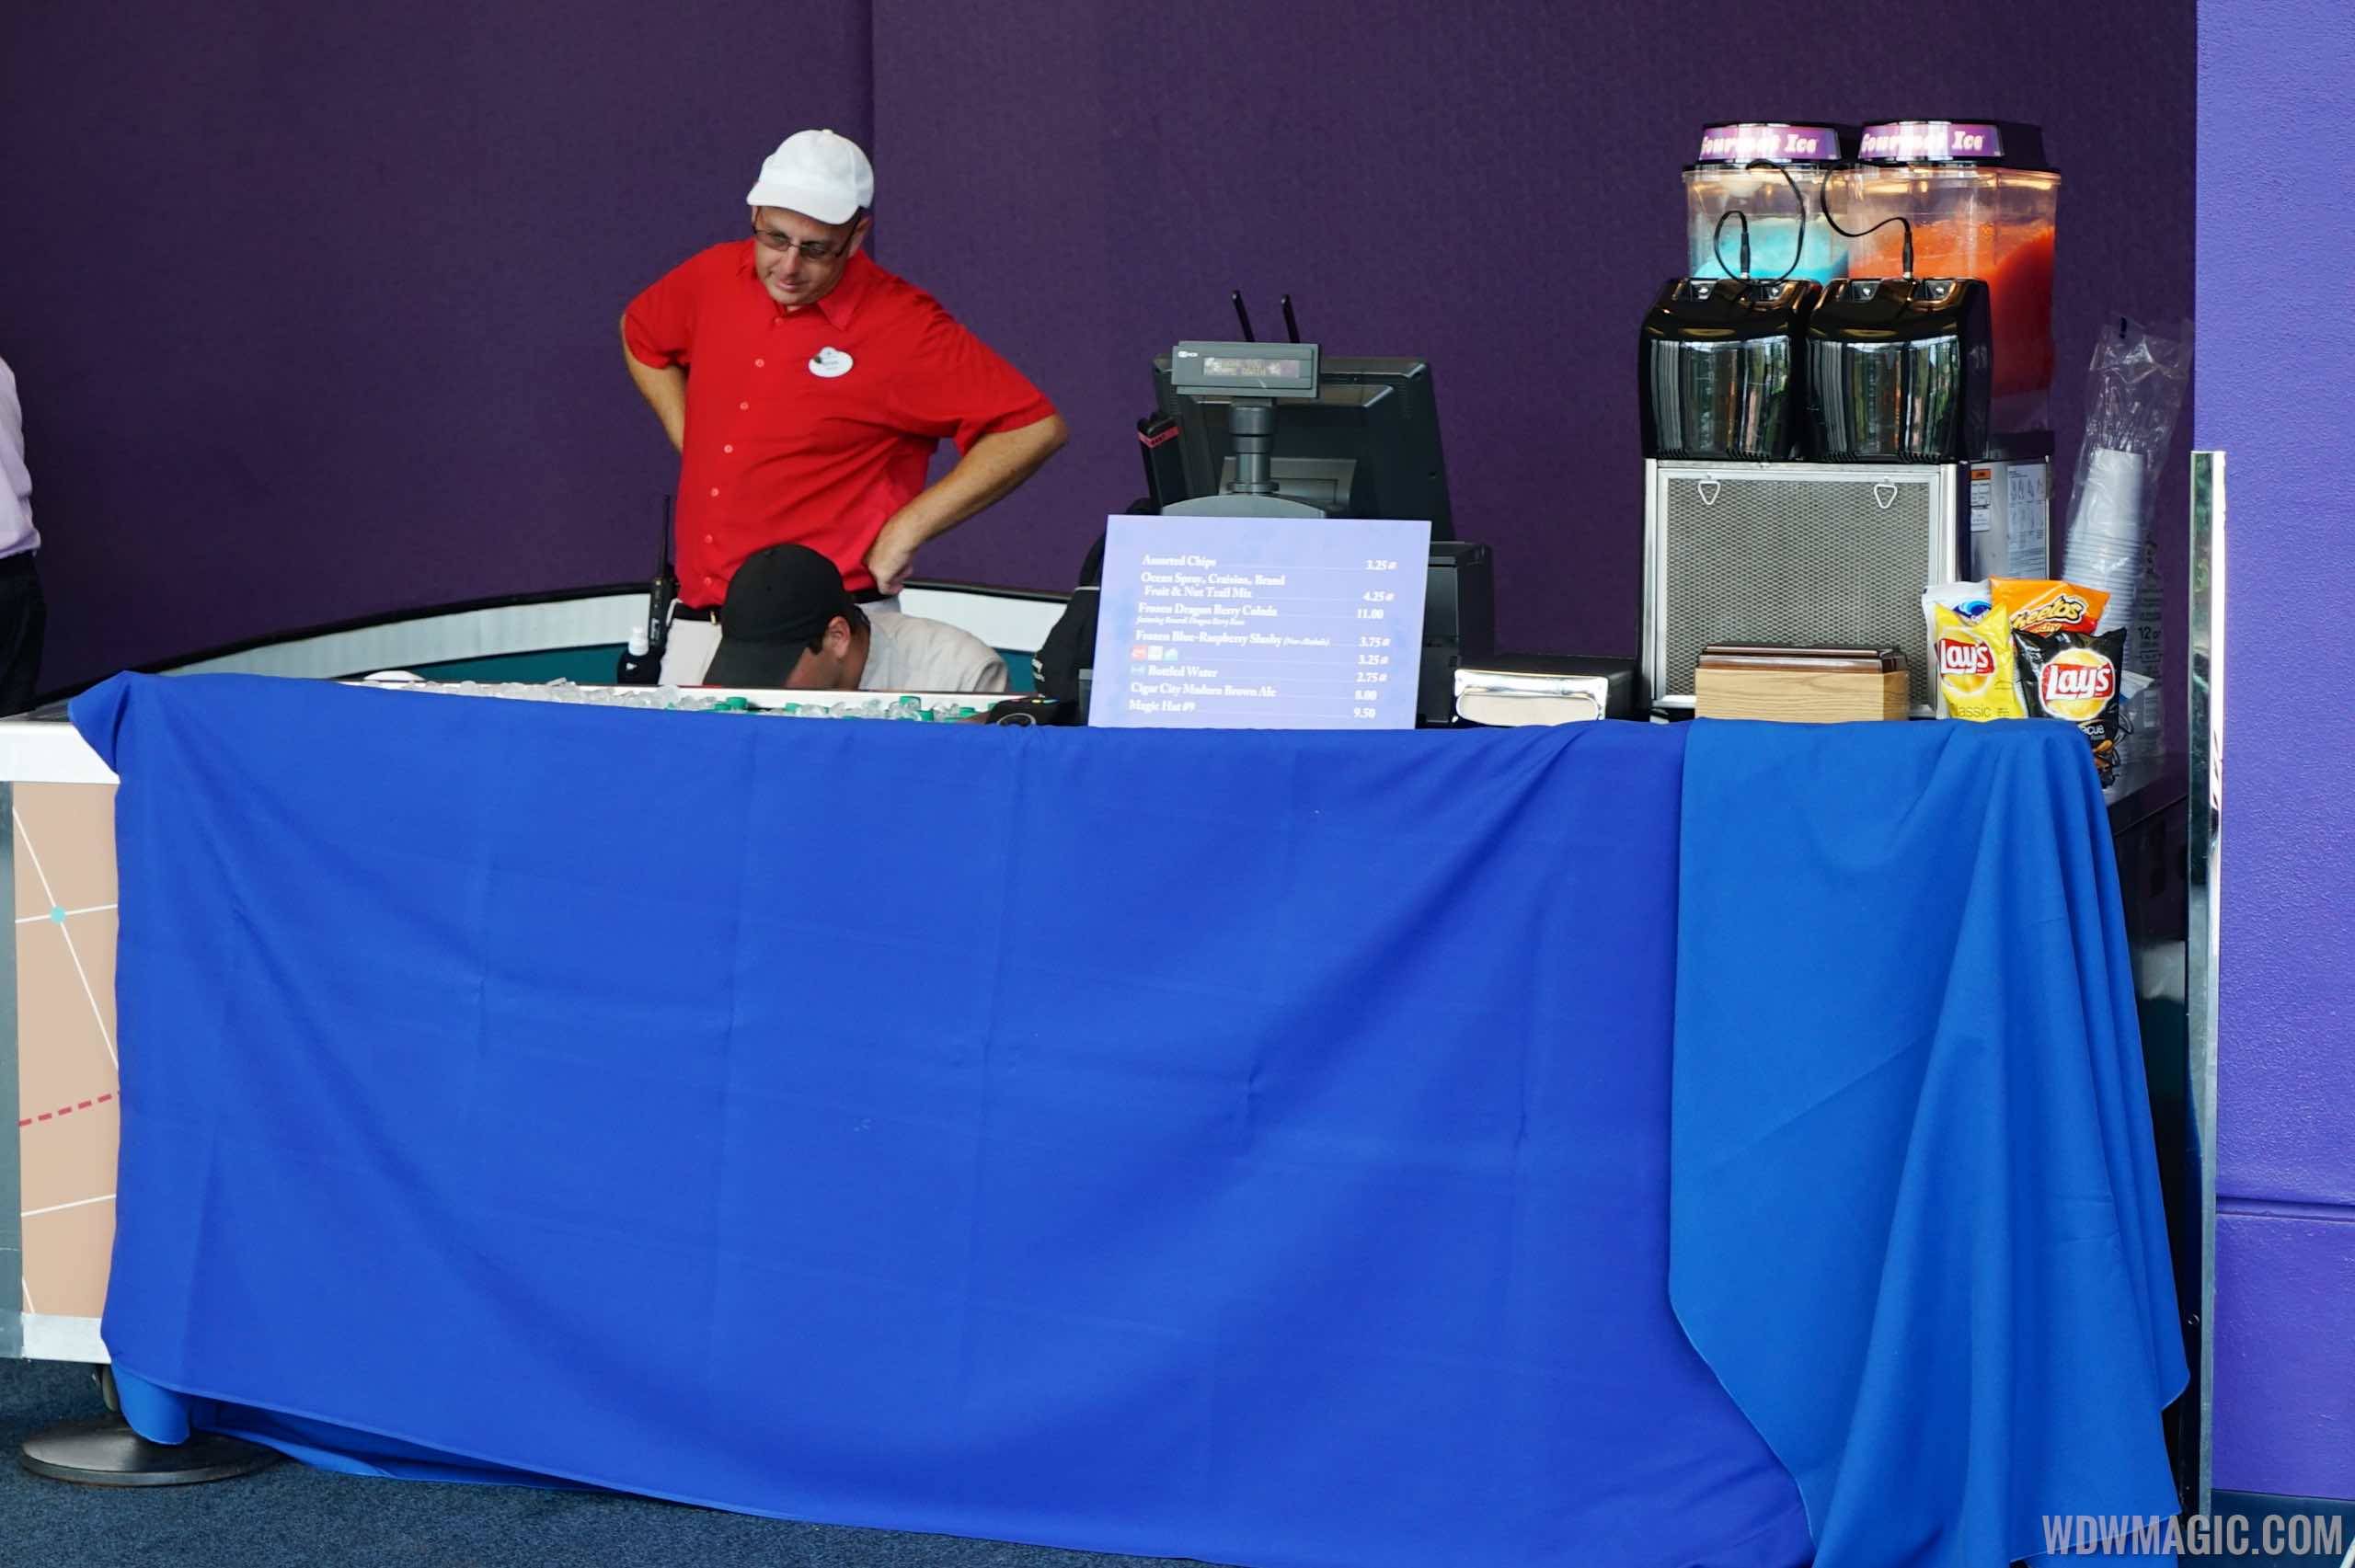 Innoventions D-Zone food and drink kiosk